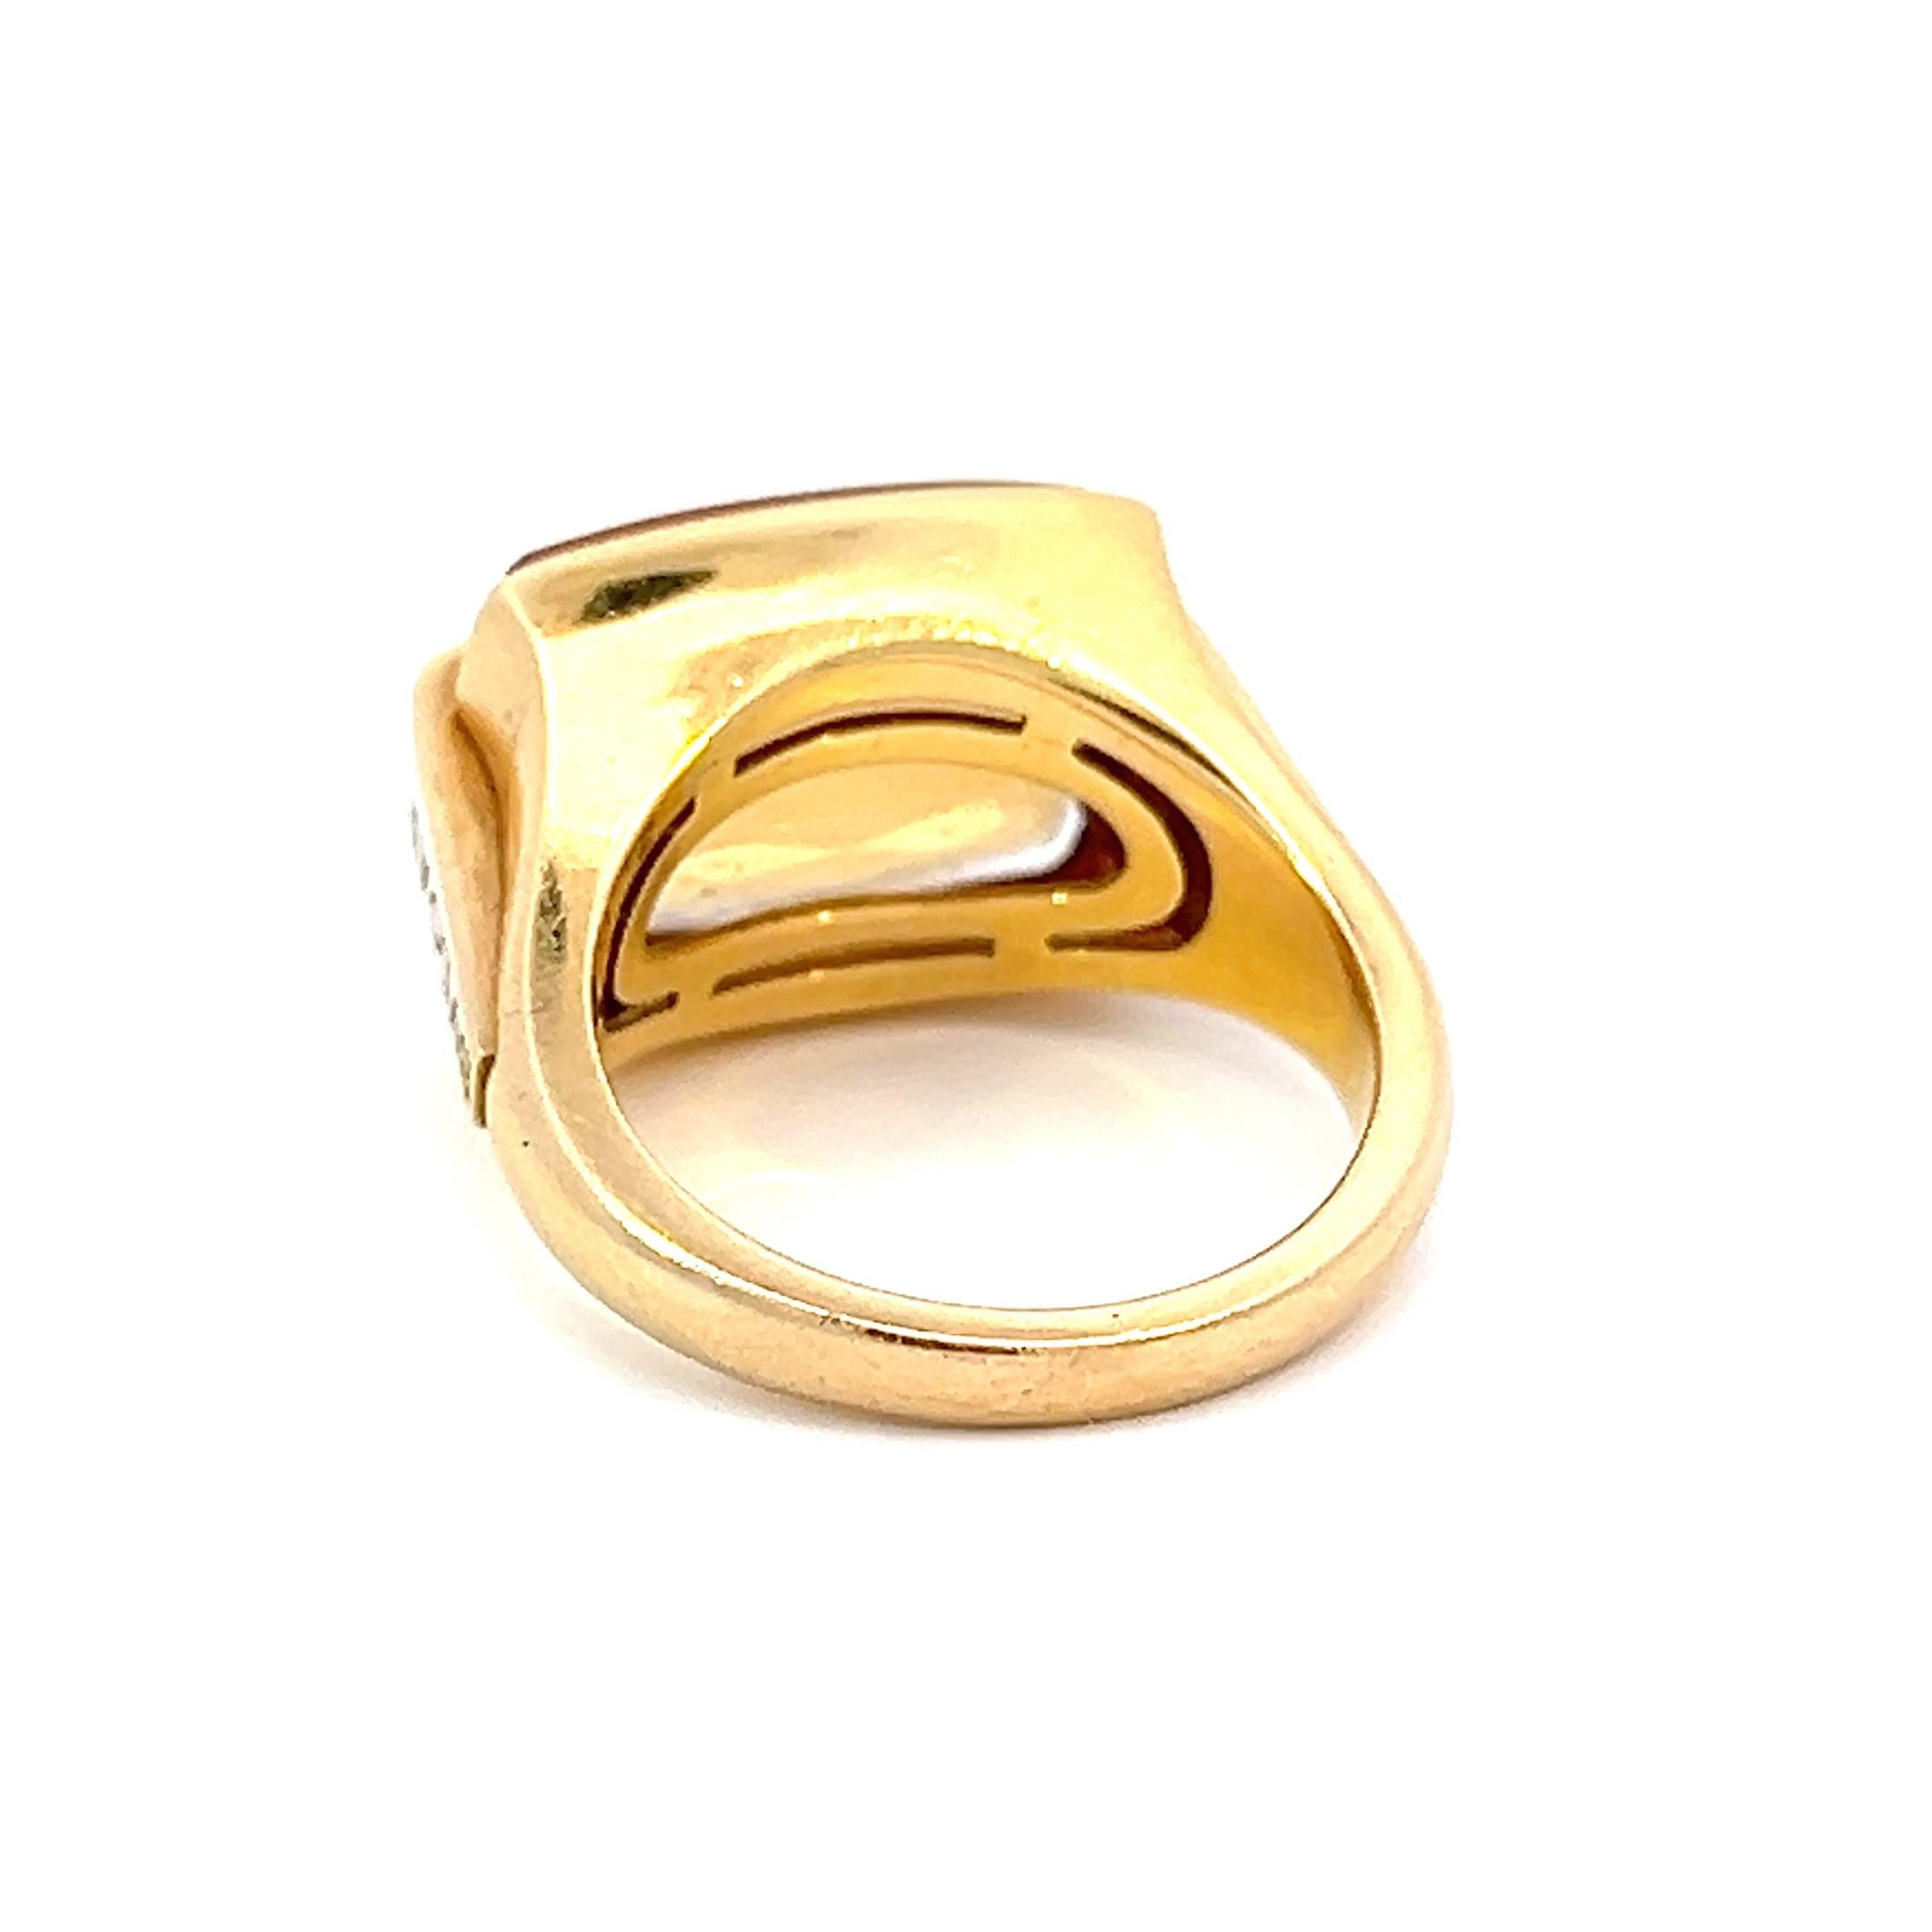 This vintage Bvlgari 18k gold ring is a real show-stopper. Featuring a stunning citrine gemstone, this one-of-a-kind design will make you the envy of all your friends! Treat yourself to a timeless piece of luxury and sparkle like never before!